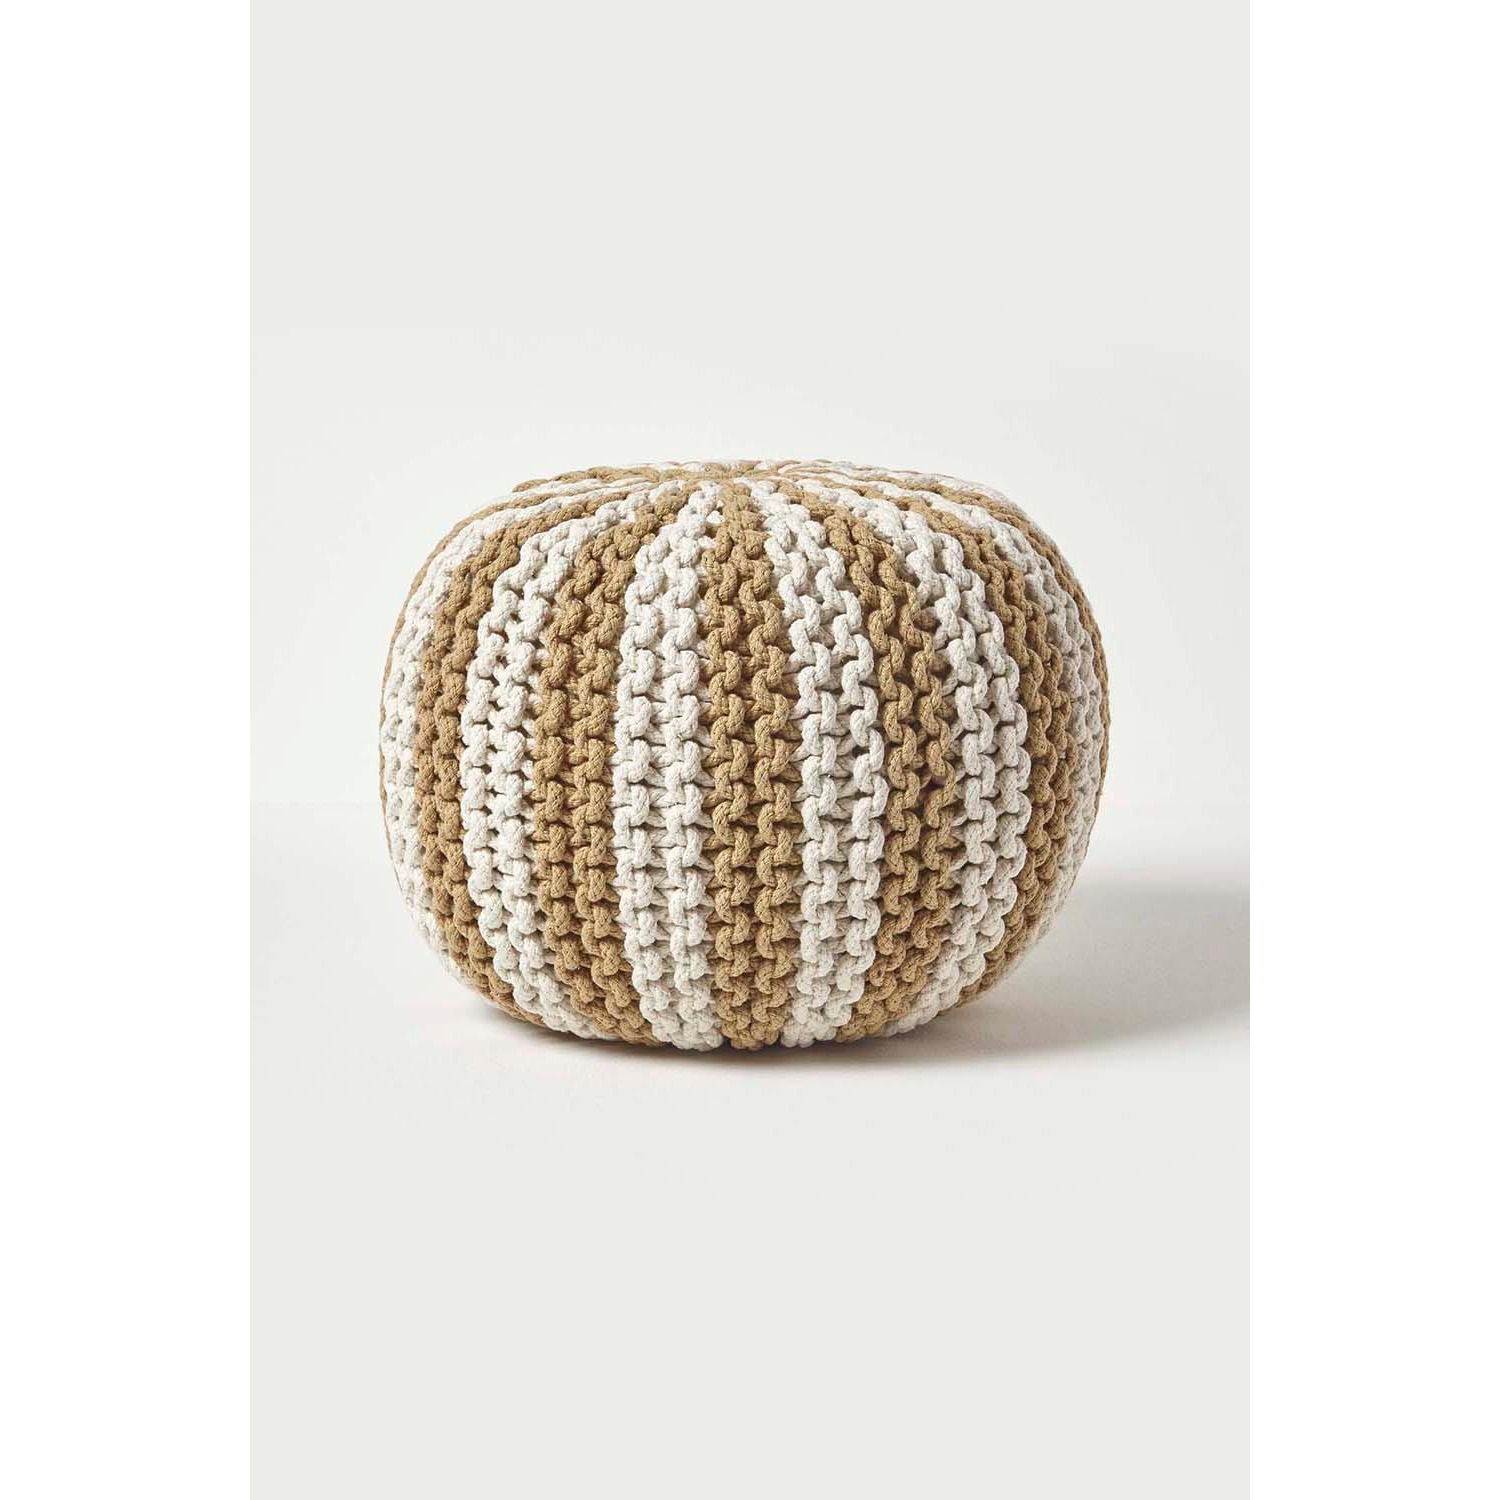 Knitted Pouffe Striped Footstool 35 x 40 cm - image 1